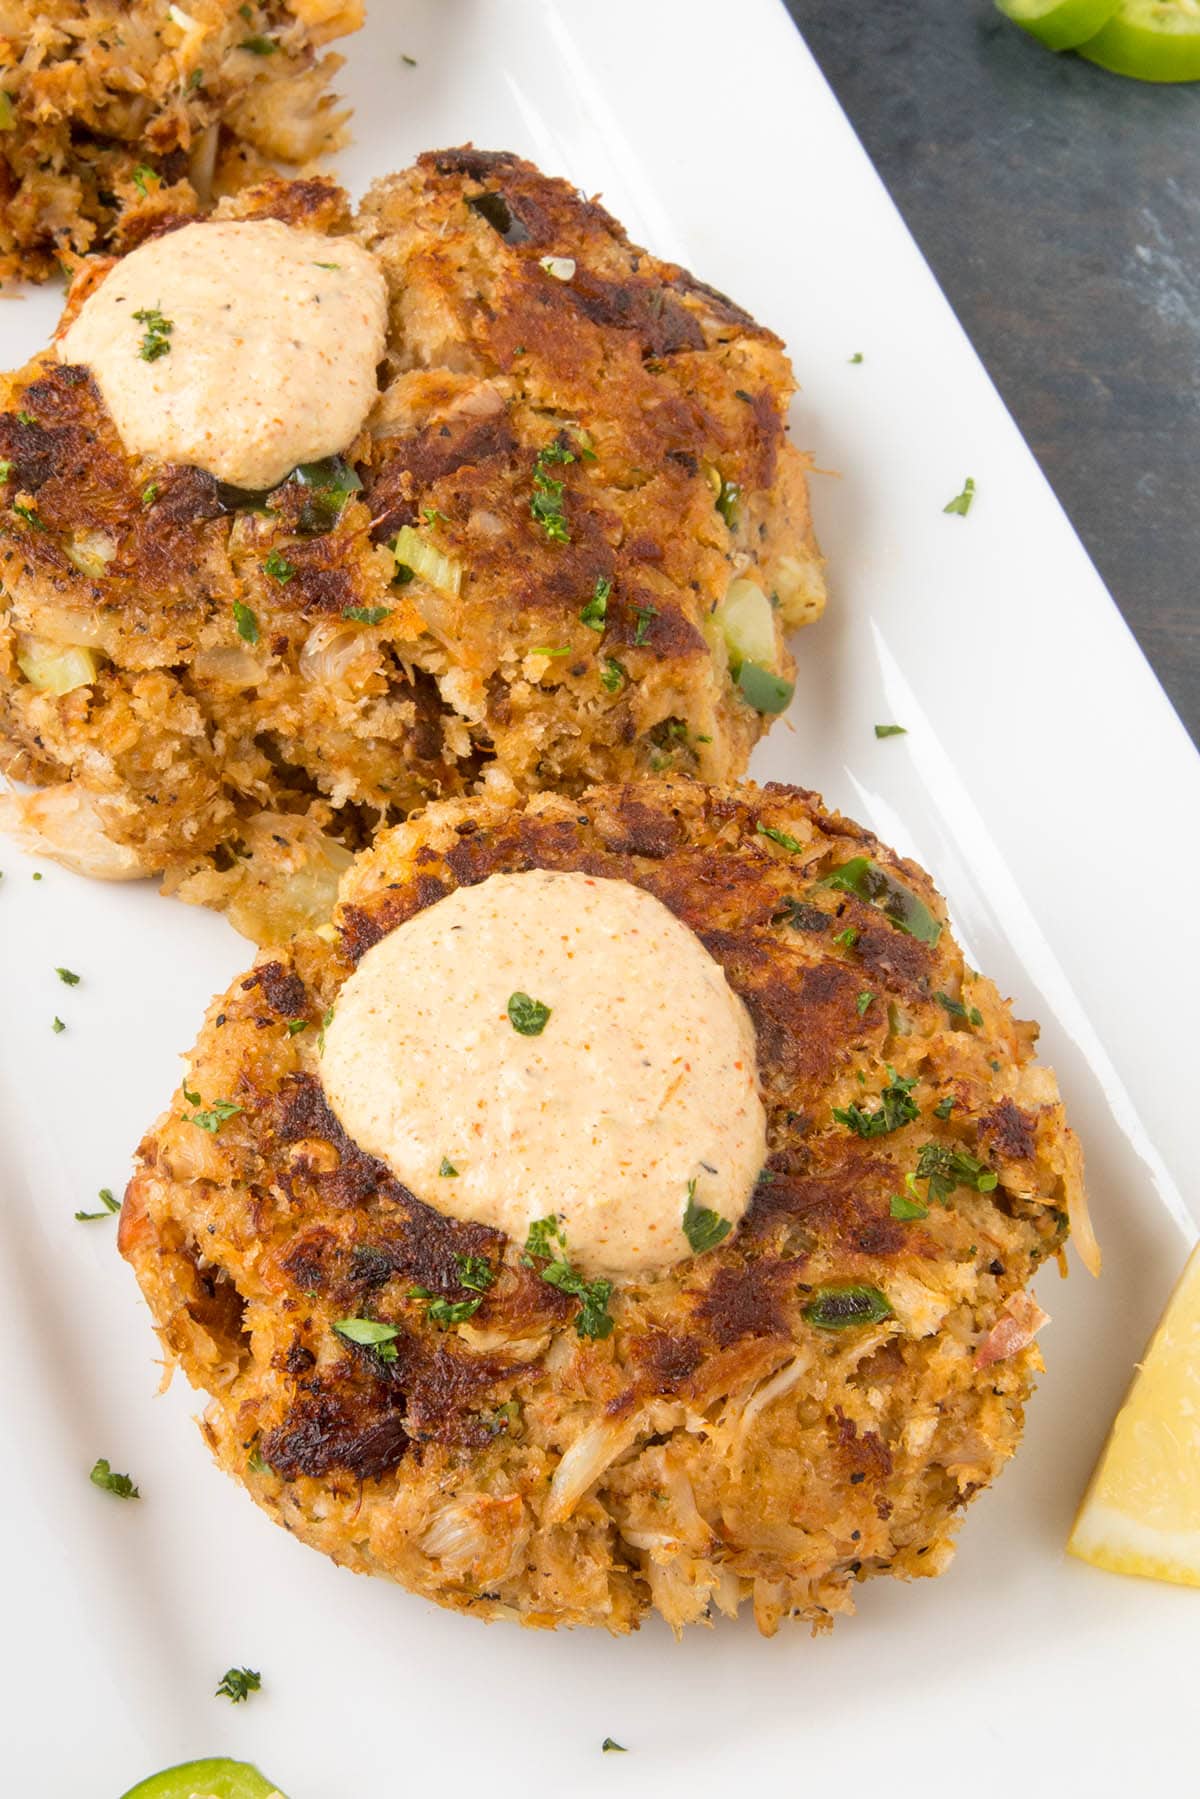 Crab Cakes with Cajun Cream Sauce - On a plate, ready to Serve